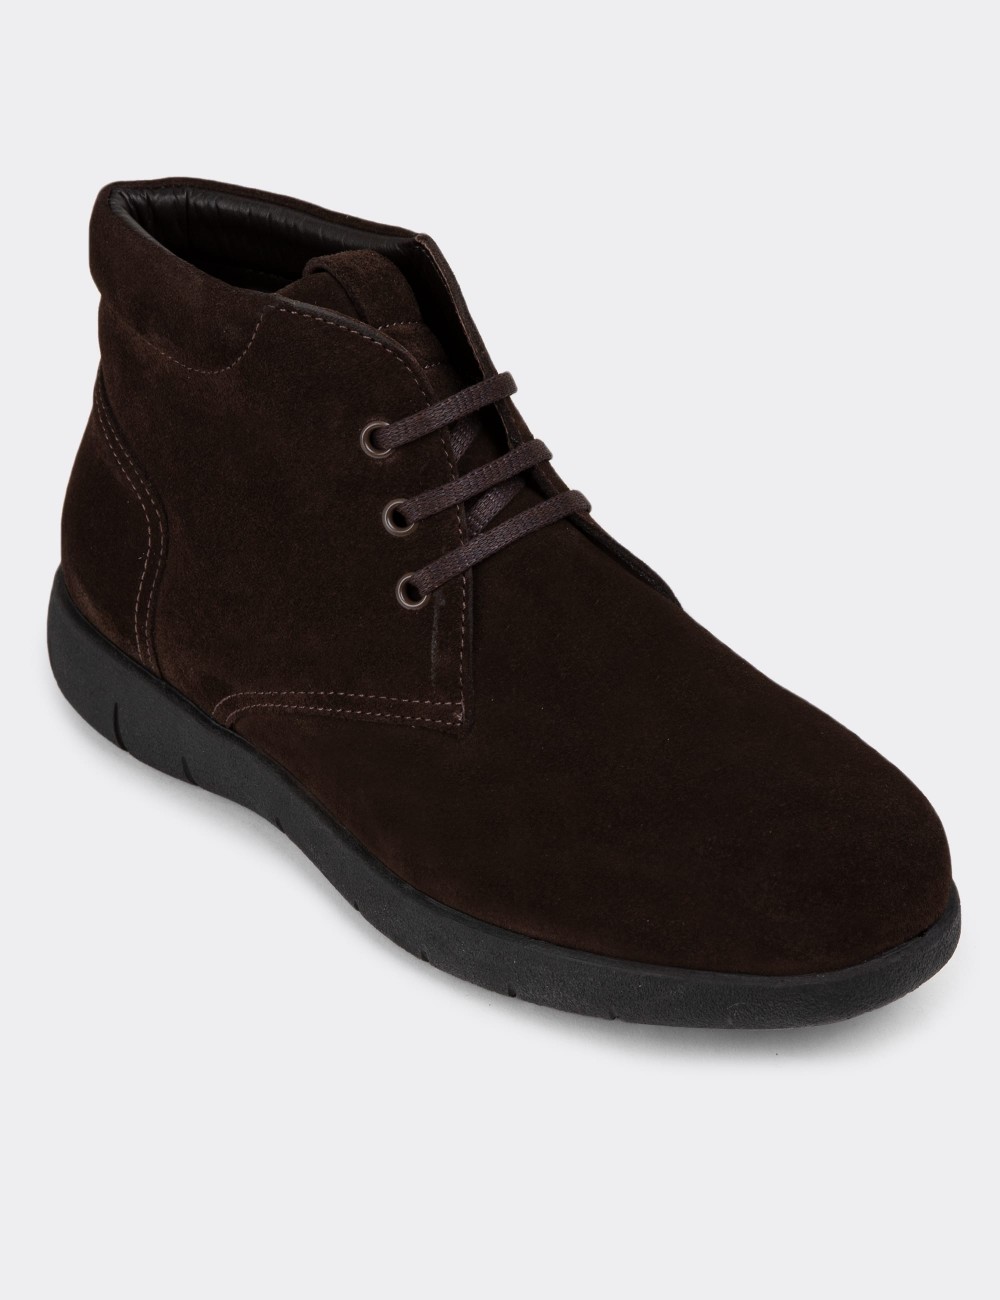 Brown Suede Leather Boots - 01948MKHVC02